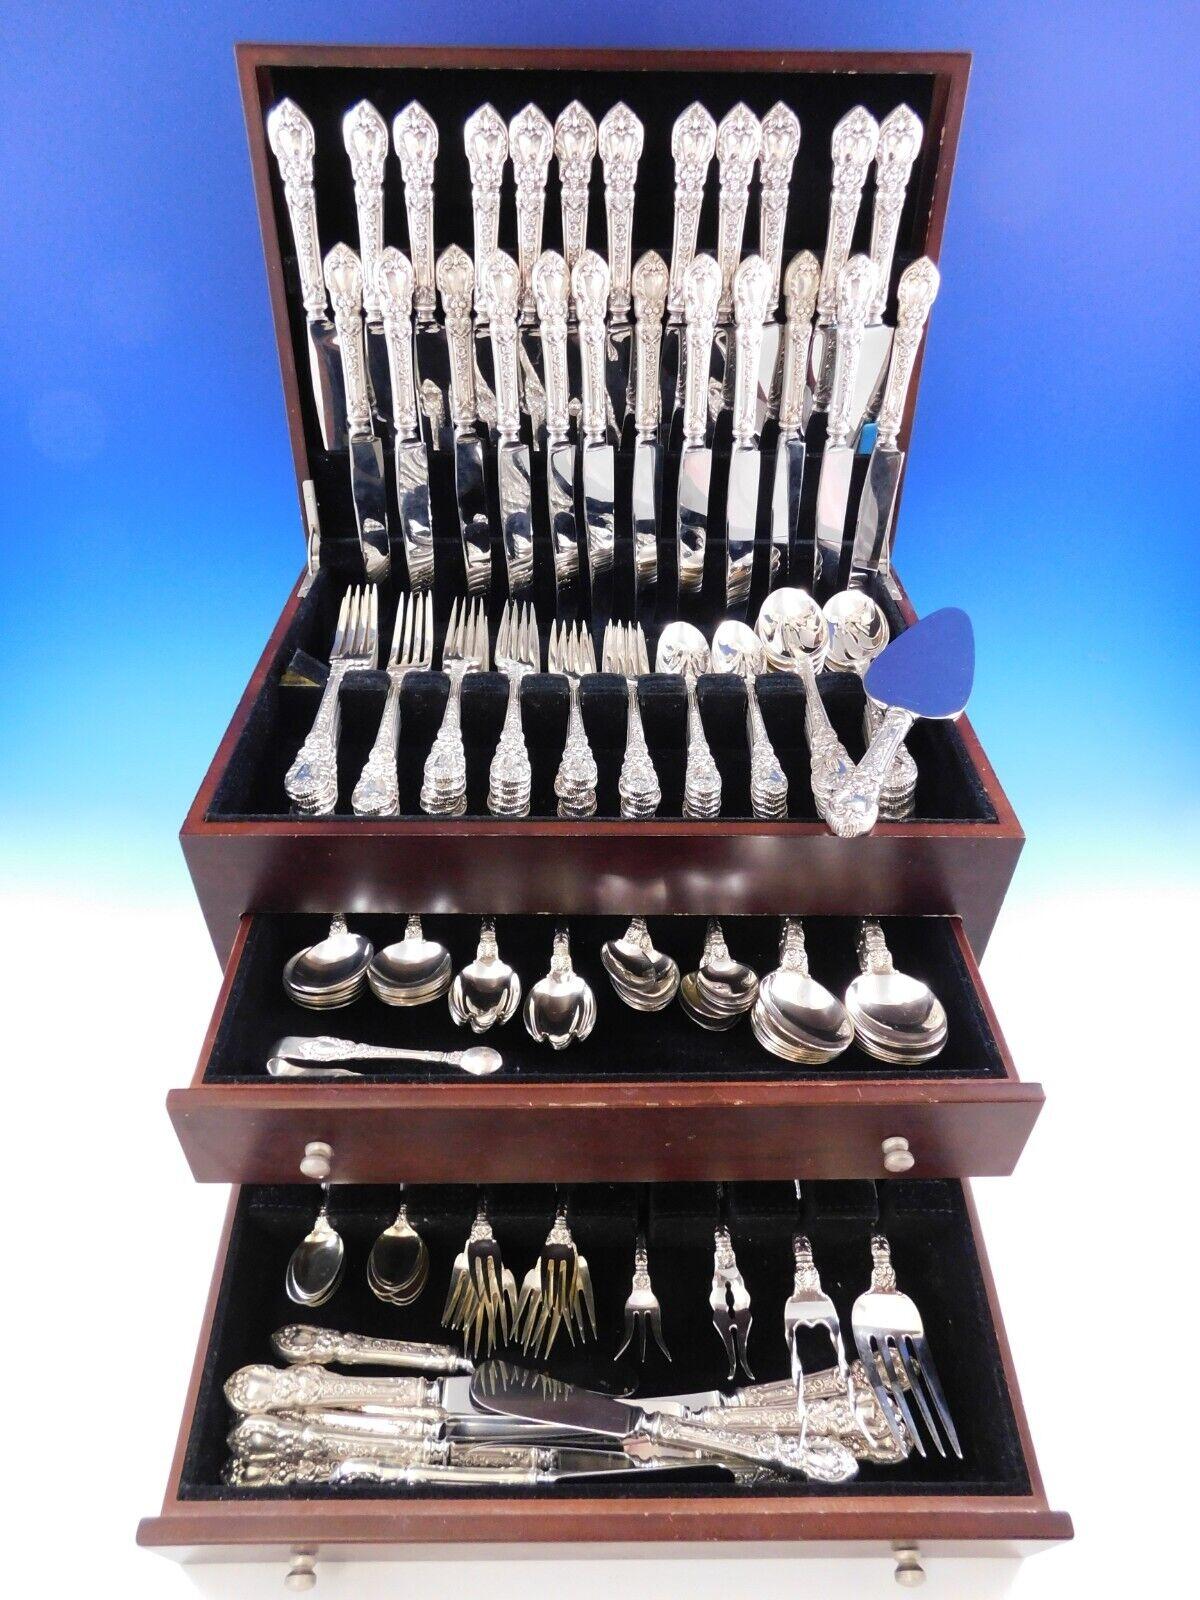 Monumental Charles II by Lunt sterling silver flatware set dinner and luncheon size - 174 pieces. This set includes:

12 Dinner Knives, 9 3/4